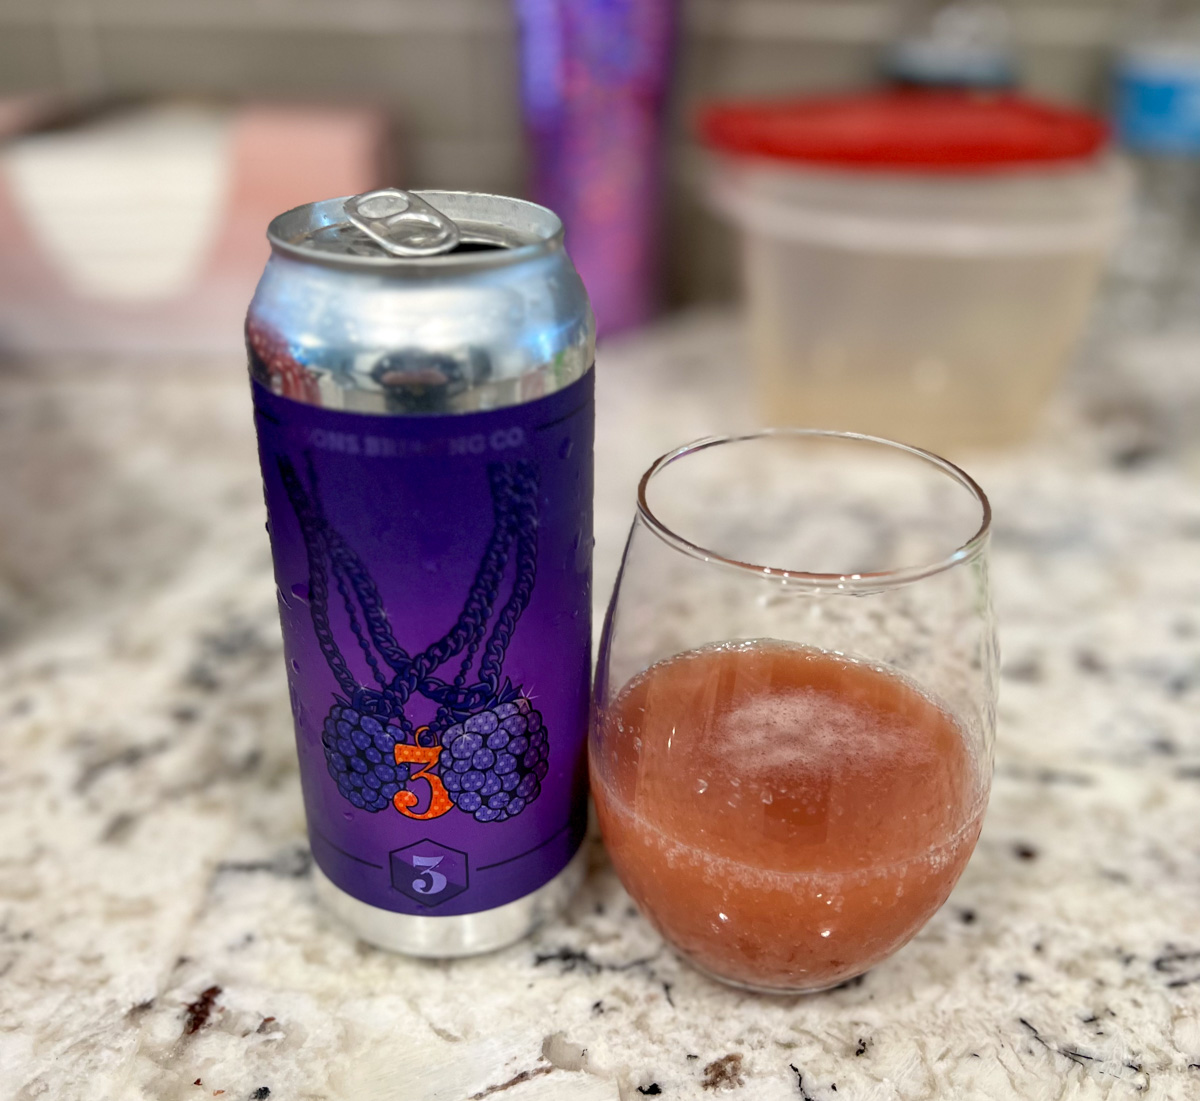 Blackberry Bling - 3 Sons Brewing Co. | ViewFromALove